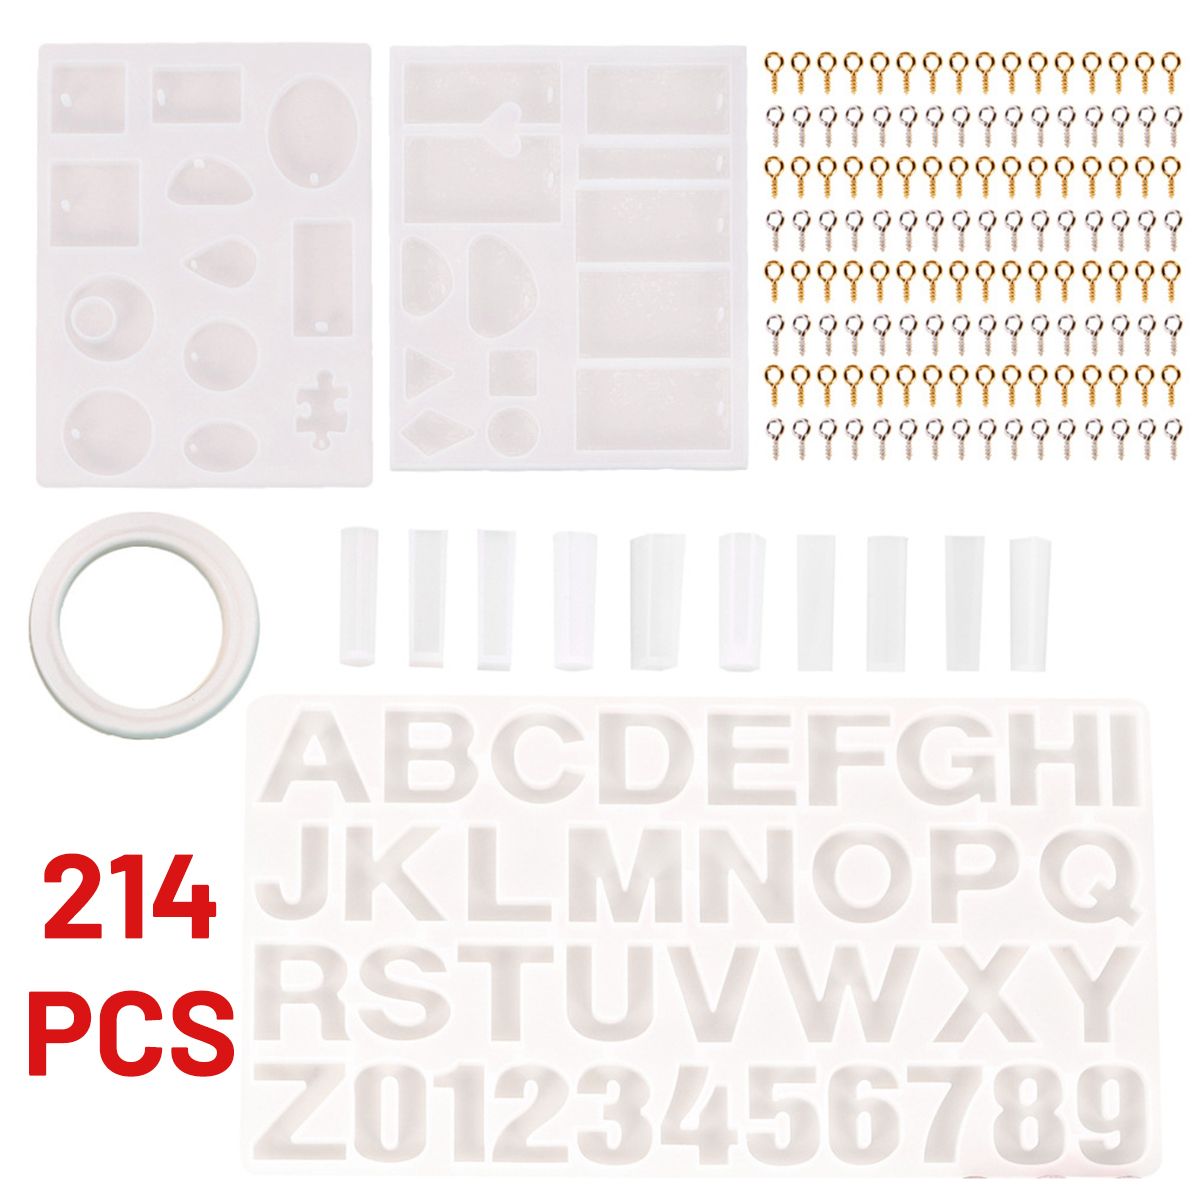 214PCS-Silicone-Epoxy-Resin-Casting-Mold-Kit-Jewelry-Pendant-Making-DIY-Mould-Craft-1741171